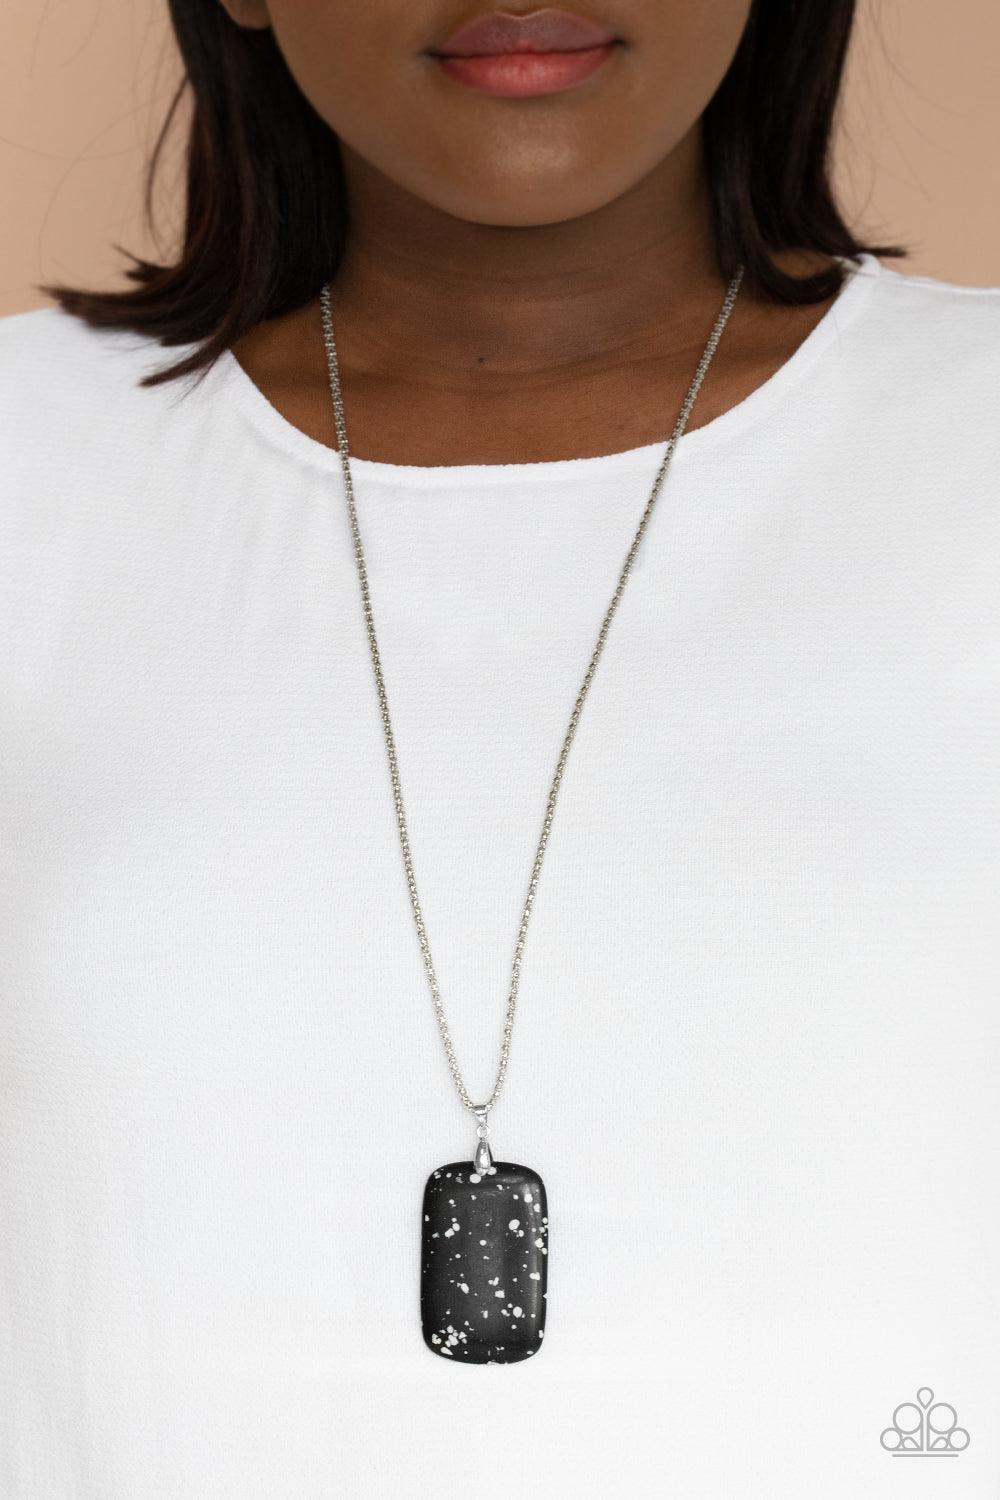 Paparazzi Accessories Fundamentally Funky - Black A speckled black stone pendant swings from the bottom of a lengthened silver popcorn chain in a colorfully earthy fashion. Features an adjustable clasp closure. Sold as one individual necklace. Includes on